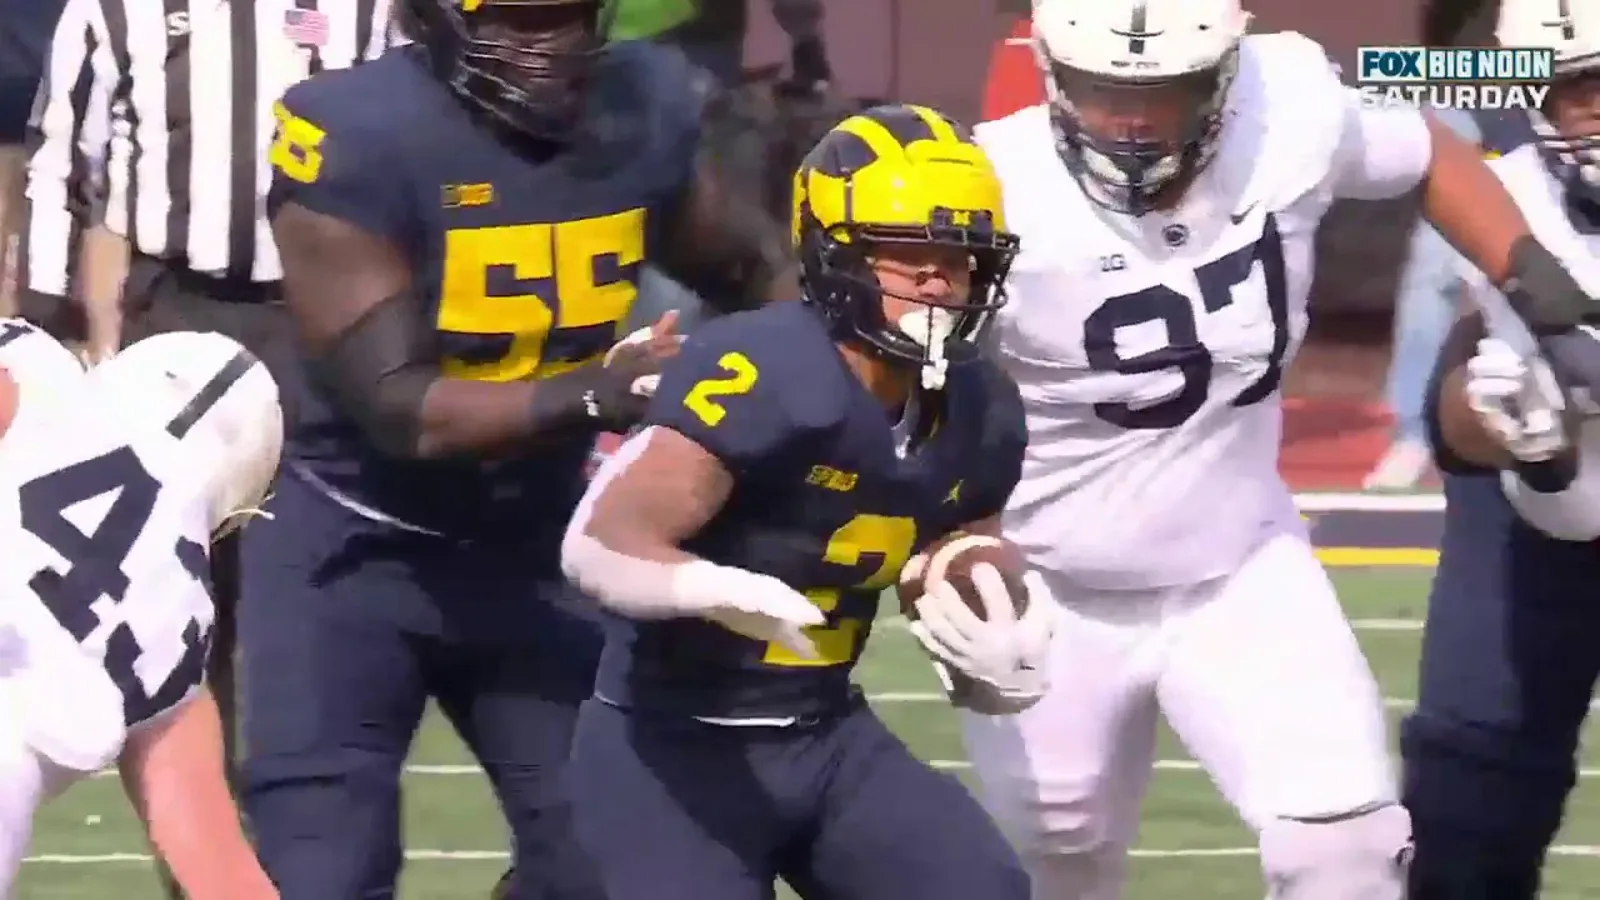 Blake Corum gets his second TD of the day with a 61-yard score to put Michigan ahead by 14